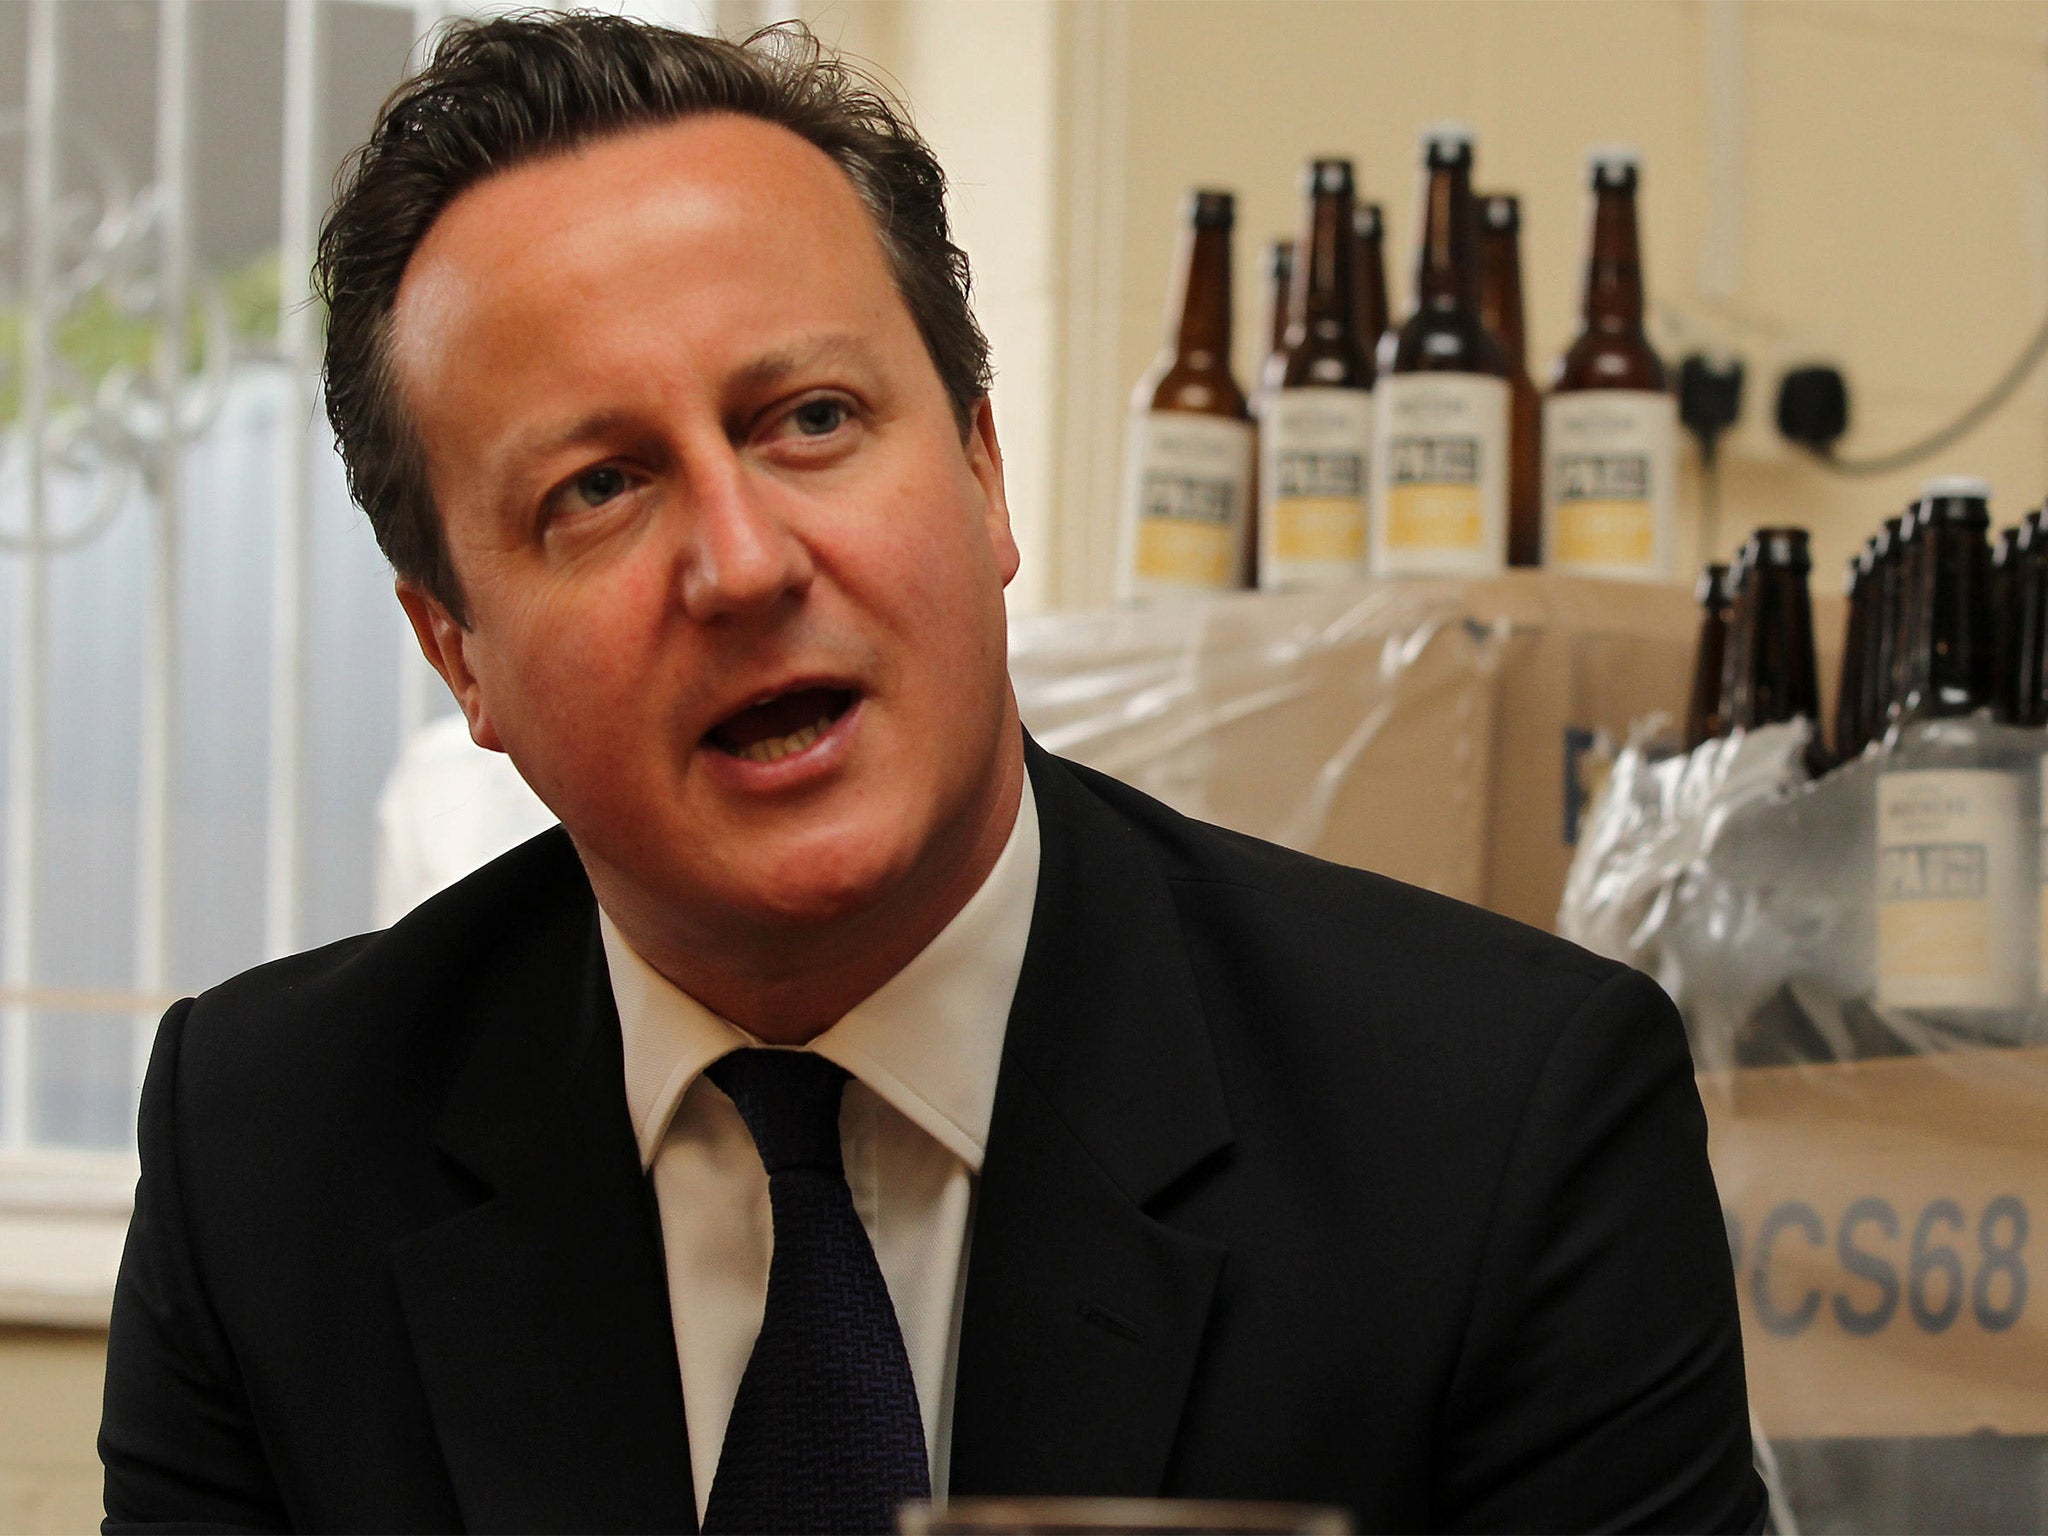 Prime Minister David Cameron during his visit to a small business start up, Seven Bro7hers brewery in Salford, on Wednesday